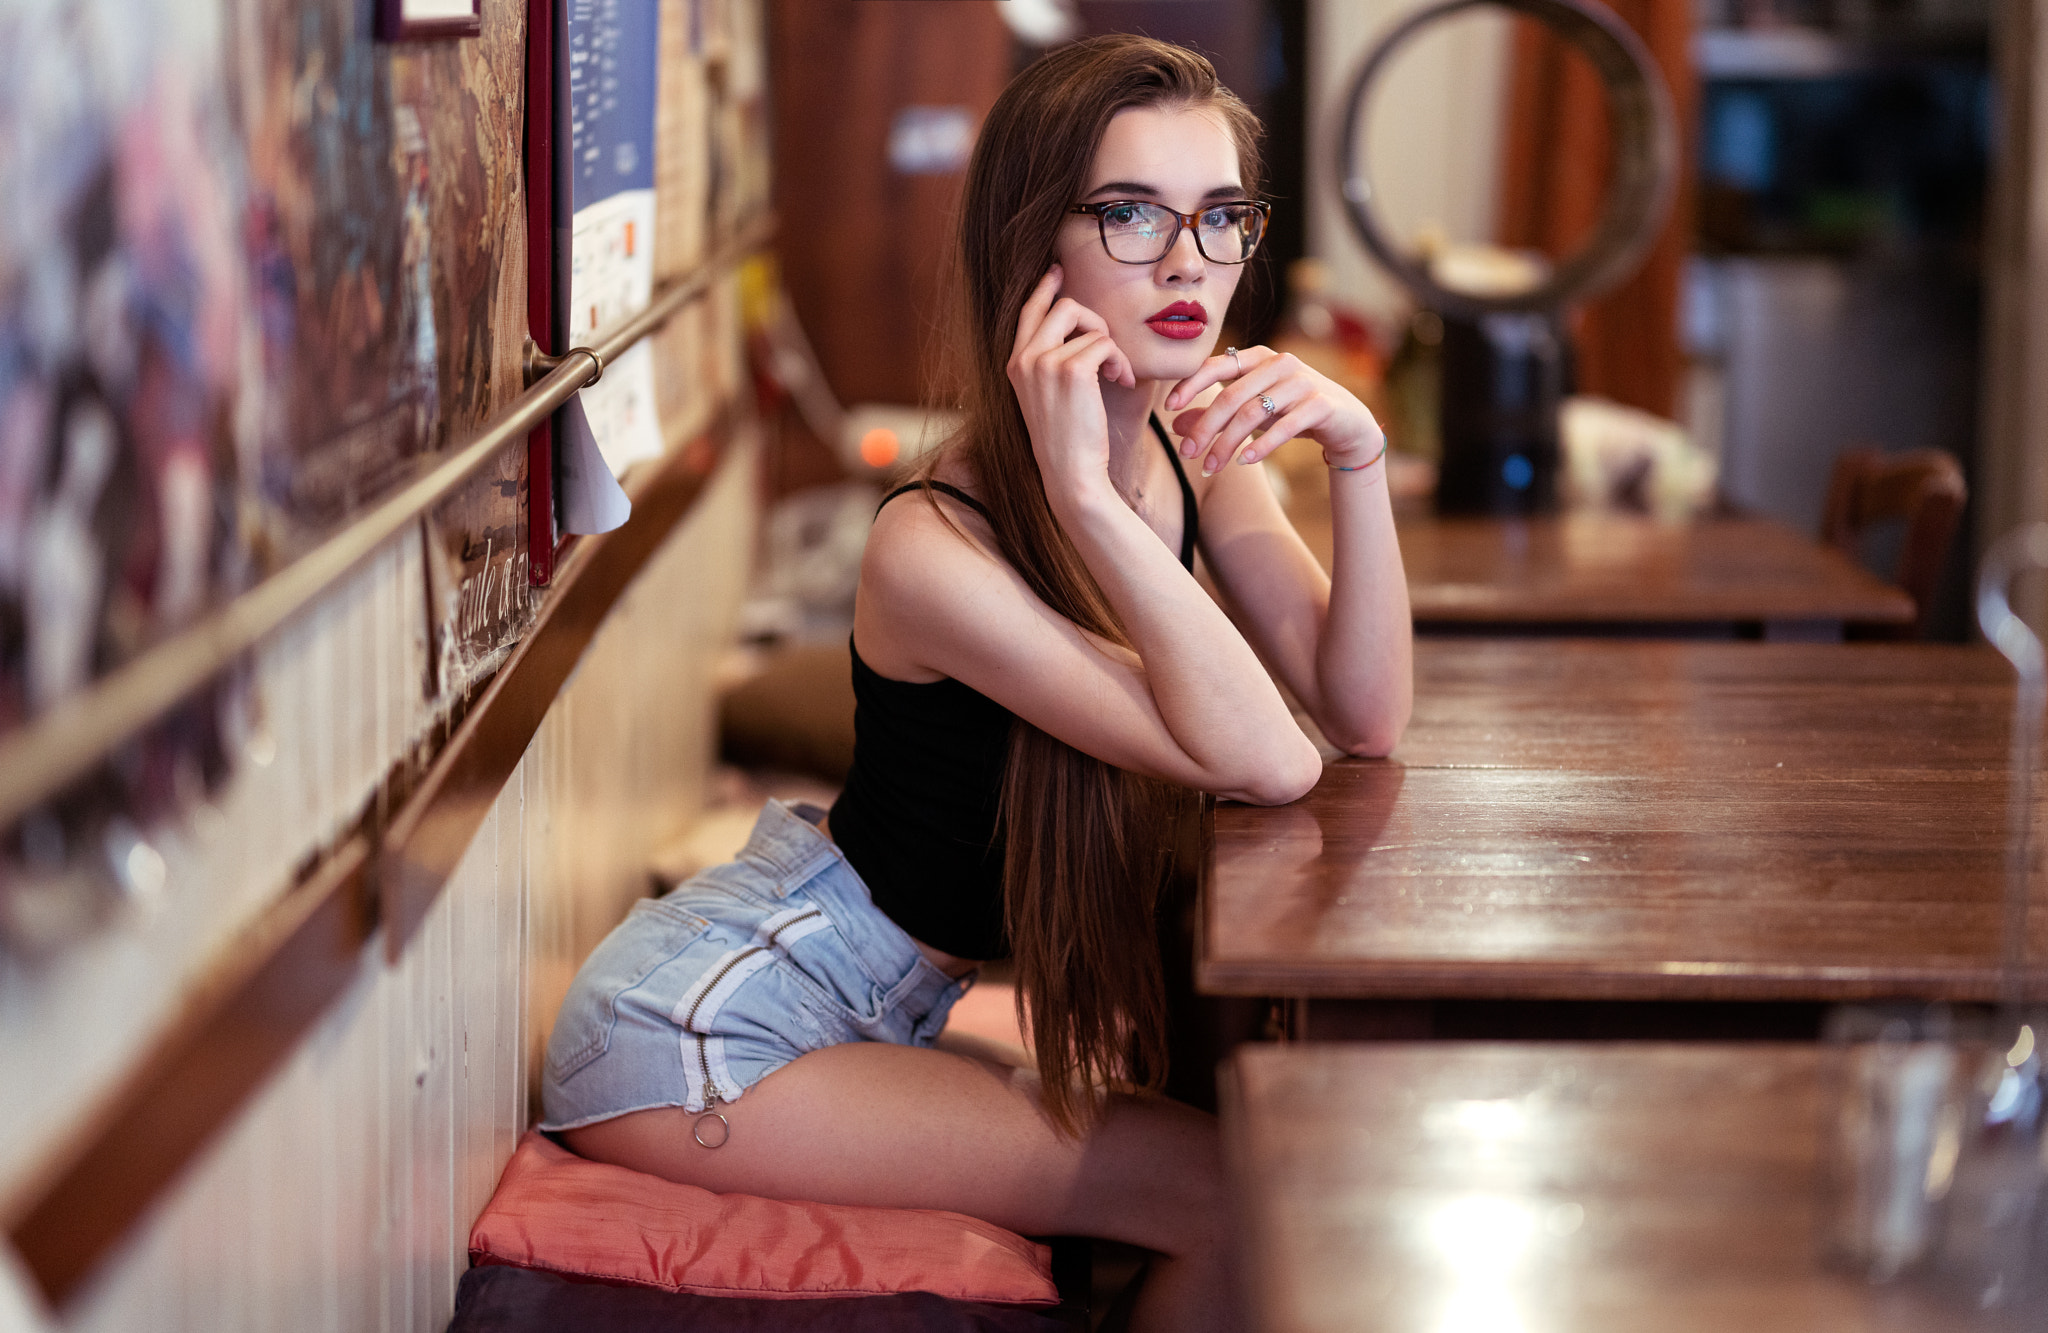 People 2048x1333 women red lipstick jean shorts long hair women with glasses sitting Marco Squassina table tank top black top